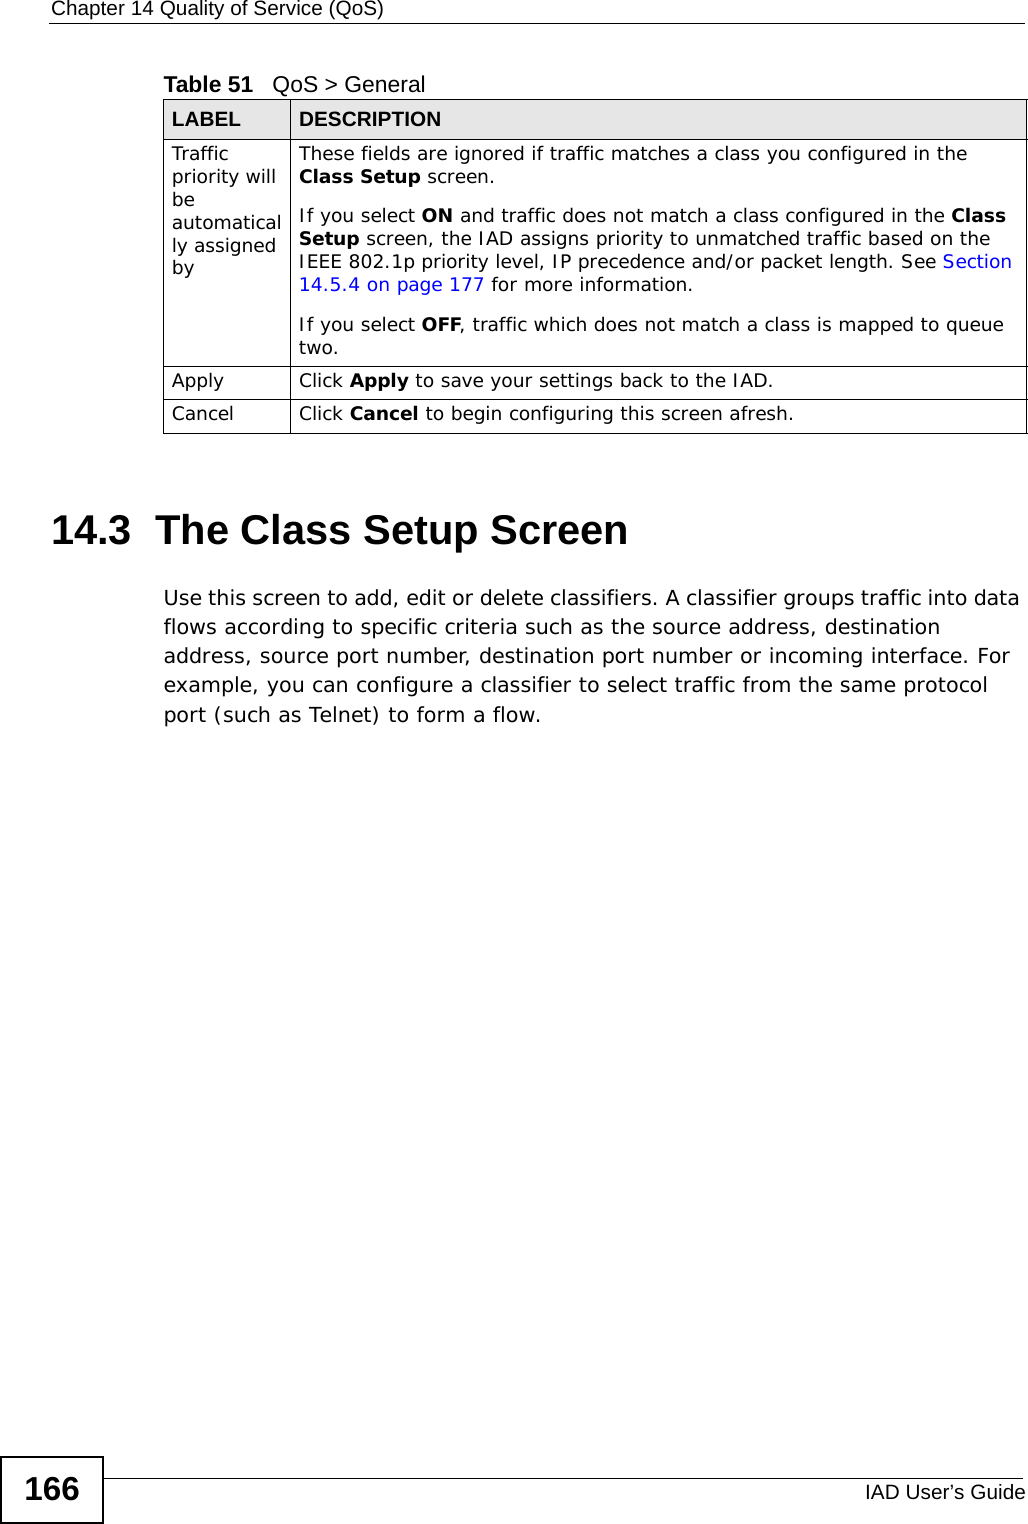 Chapter 14 Quality of Service (QoS)IAD User’s Guide16614.3  The Class Setup Screen   Use this screen to add, edit or delete classifiers. A classifier groups traffic into data flows according to specific criteria such as the source address, destination address, source port number, destination port number or incoming interface. For example, you can configure a classifier to select traffic from the same protocol port (such as Telnet) to form a flow.Traffic priority will be automatically assigned byThese fields are ignored if traffic matches a class you configured in the Class Setup screen.If you select ON and traffic does not match a class configured in the Class Setup screen, the IAD assigns priority to unmatched traffic based on the IEEE 802.1p priority level, IP precedence and/or packet length. See Section 14.5.4 on page 177 for more information.If you select OFF, traffic which does not match a class is mapped to queue two.Apply Click Apply to save your settings back to the IAD.Cancel Click Cancel to begin configuring this screen afresh.Table 51   QoS &gt; GeneralLABEL DESCRIPTION